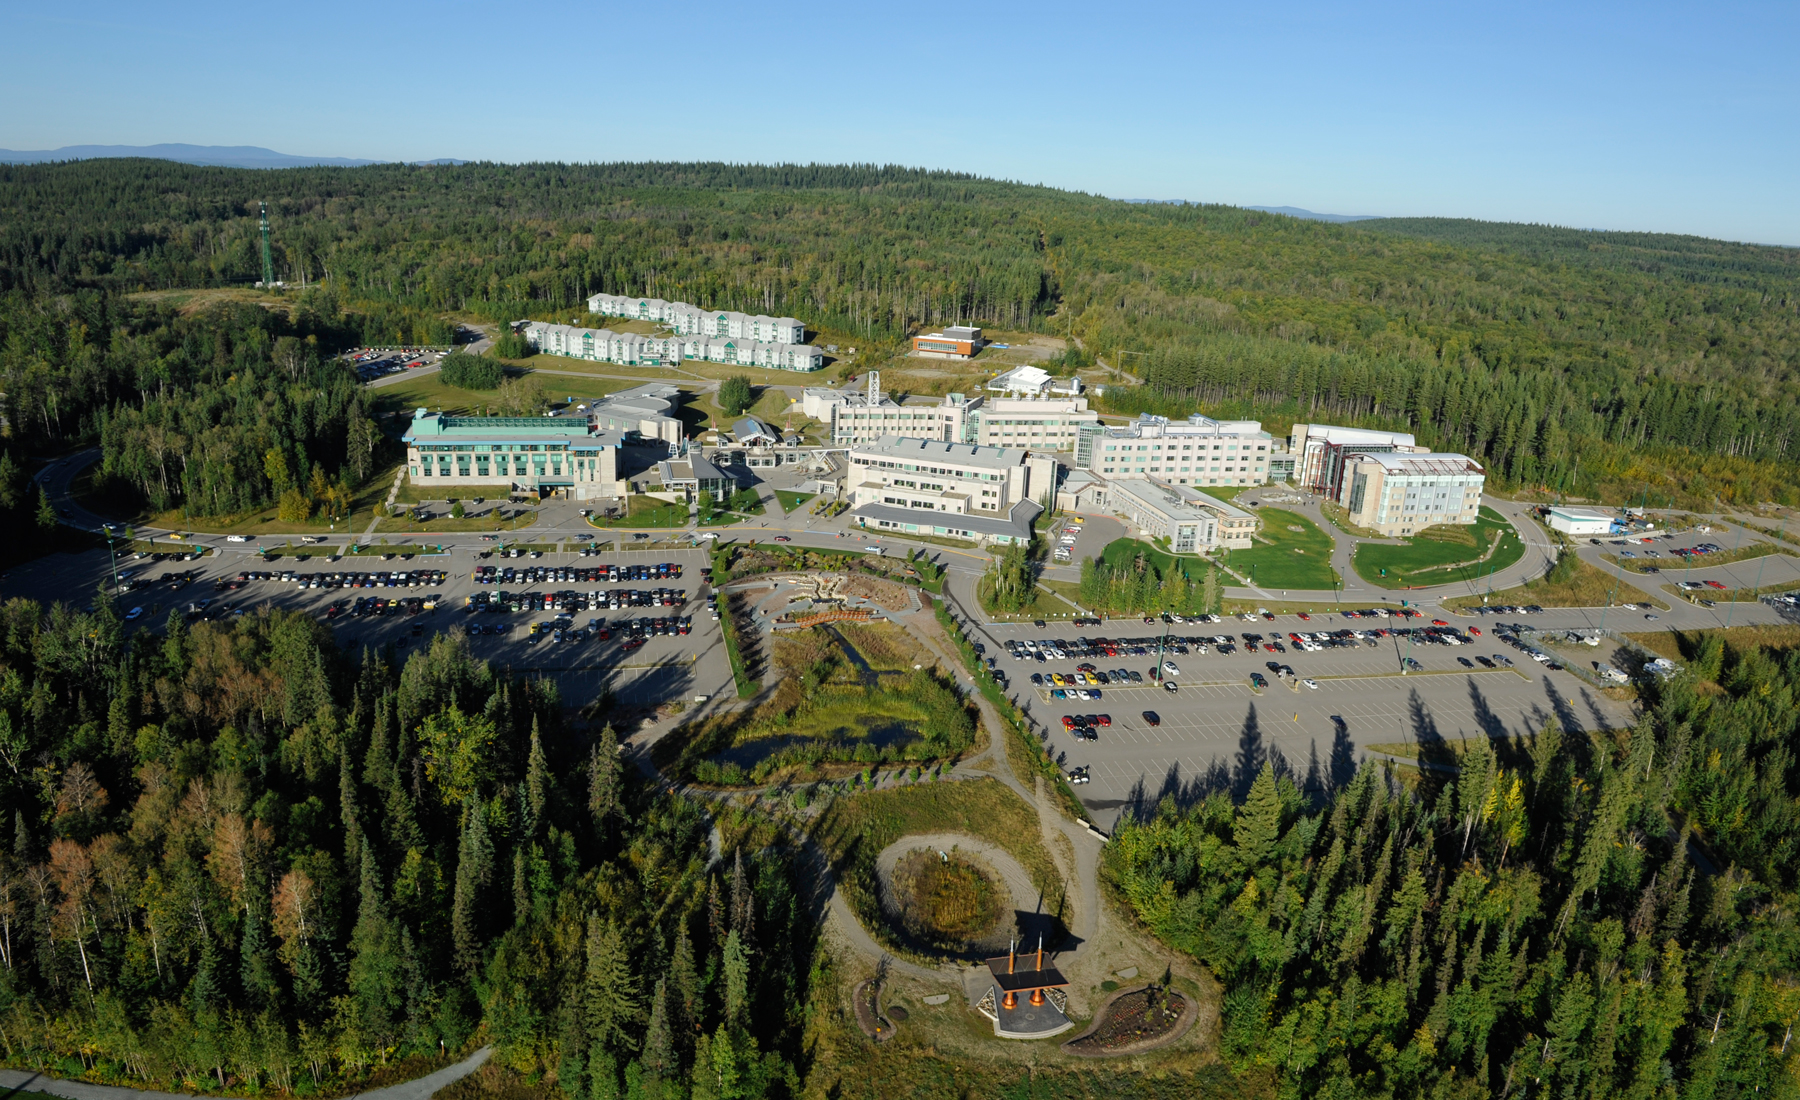 UNBC Campus on 550 hectares of campus grounds